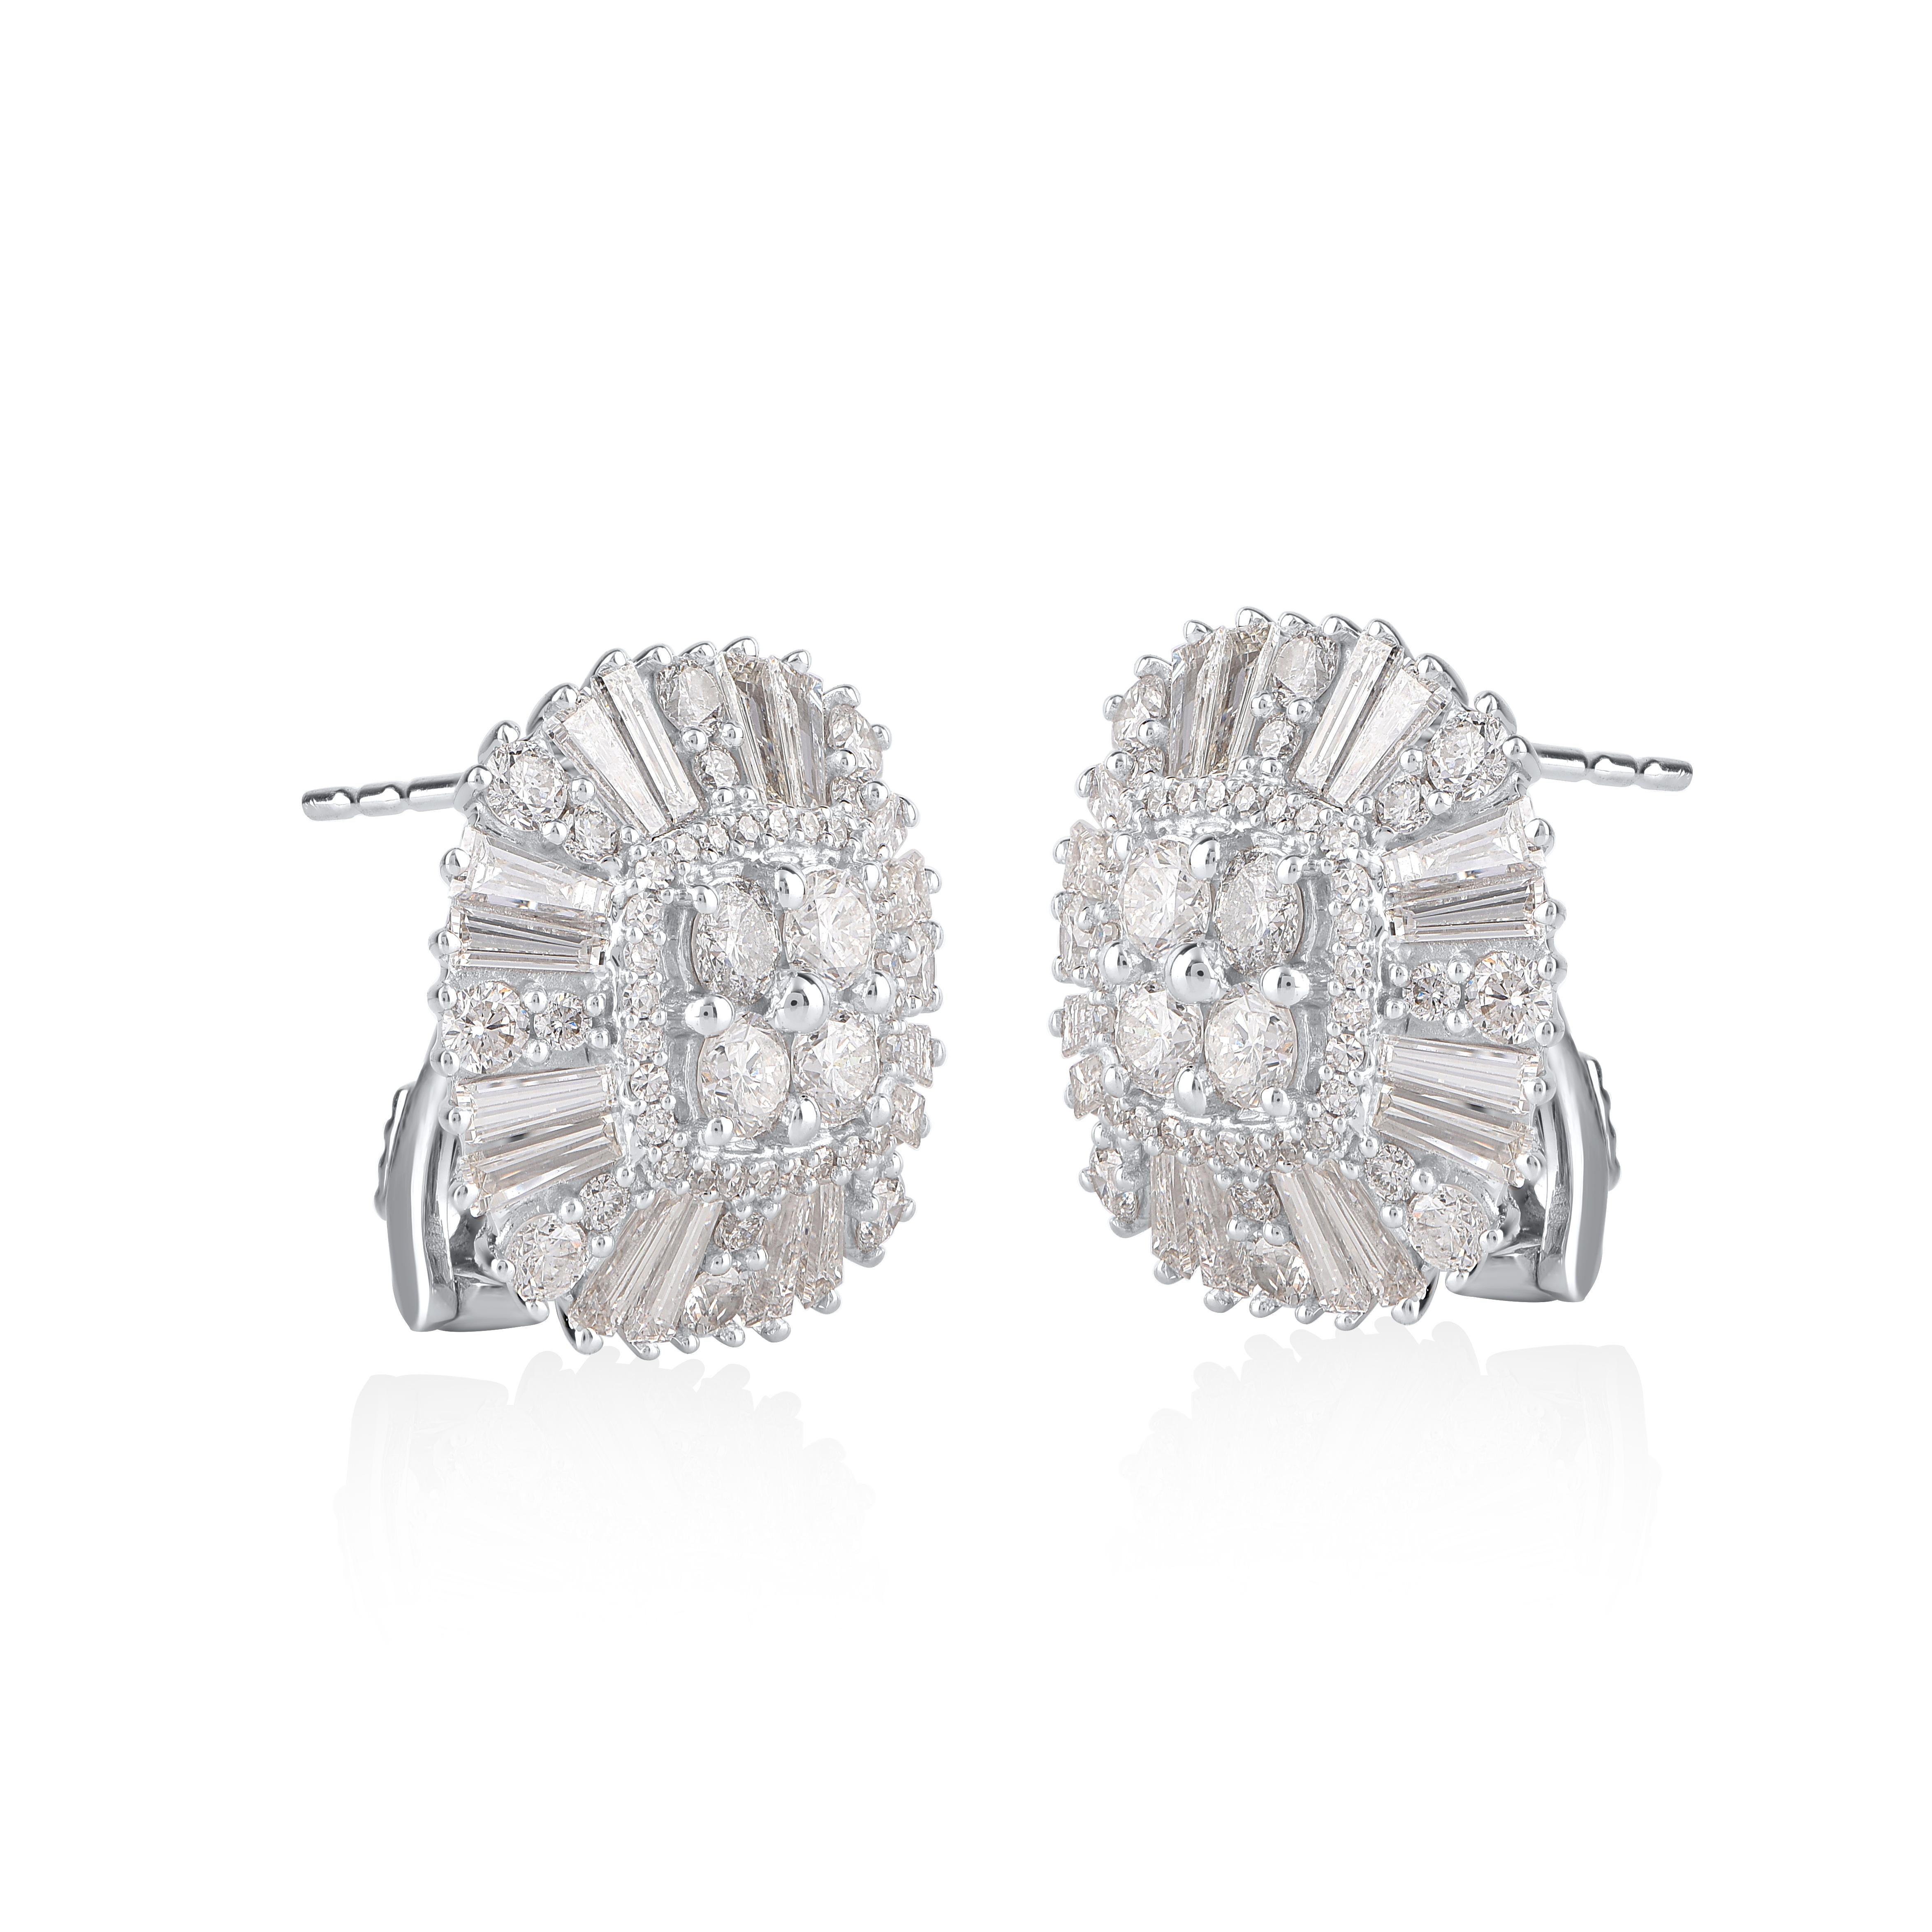 The perfect complement to her classic style, this diamond cushion stud earrings shines with your happily ever after.These earrings feature clusters of dazzling 32 baguette and 96 round diamond set in prong and channel setting.These timeless stud